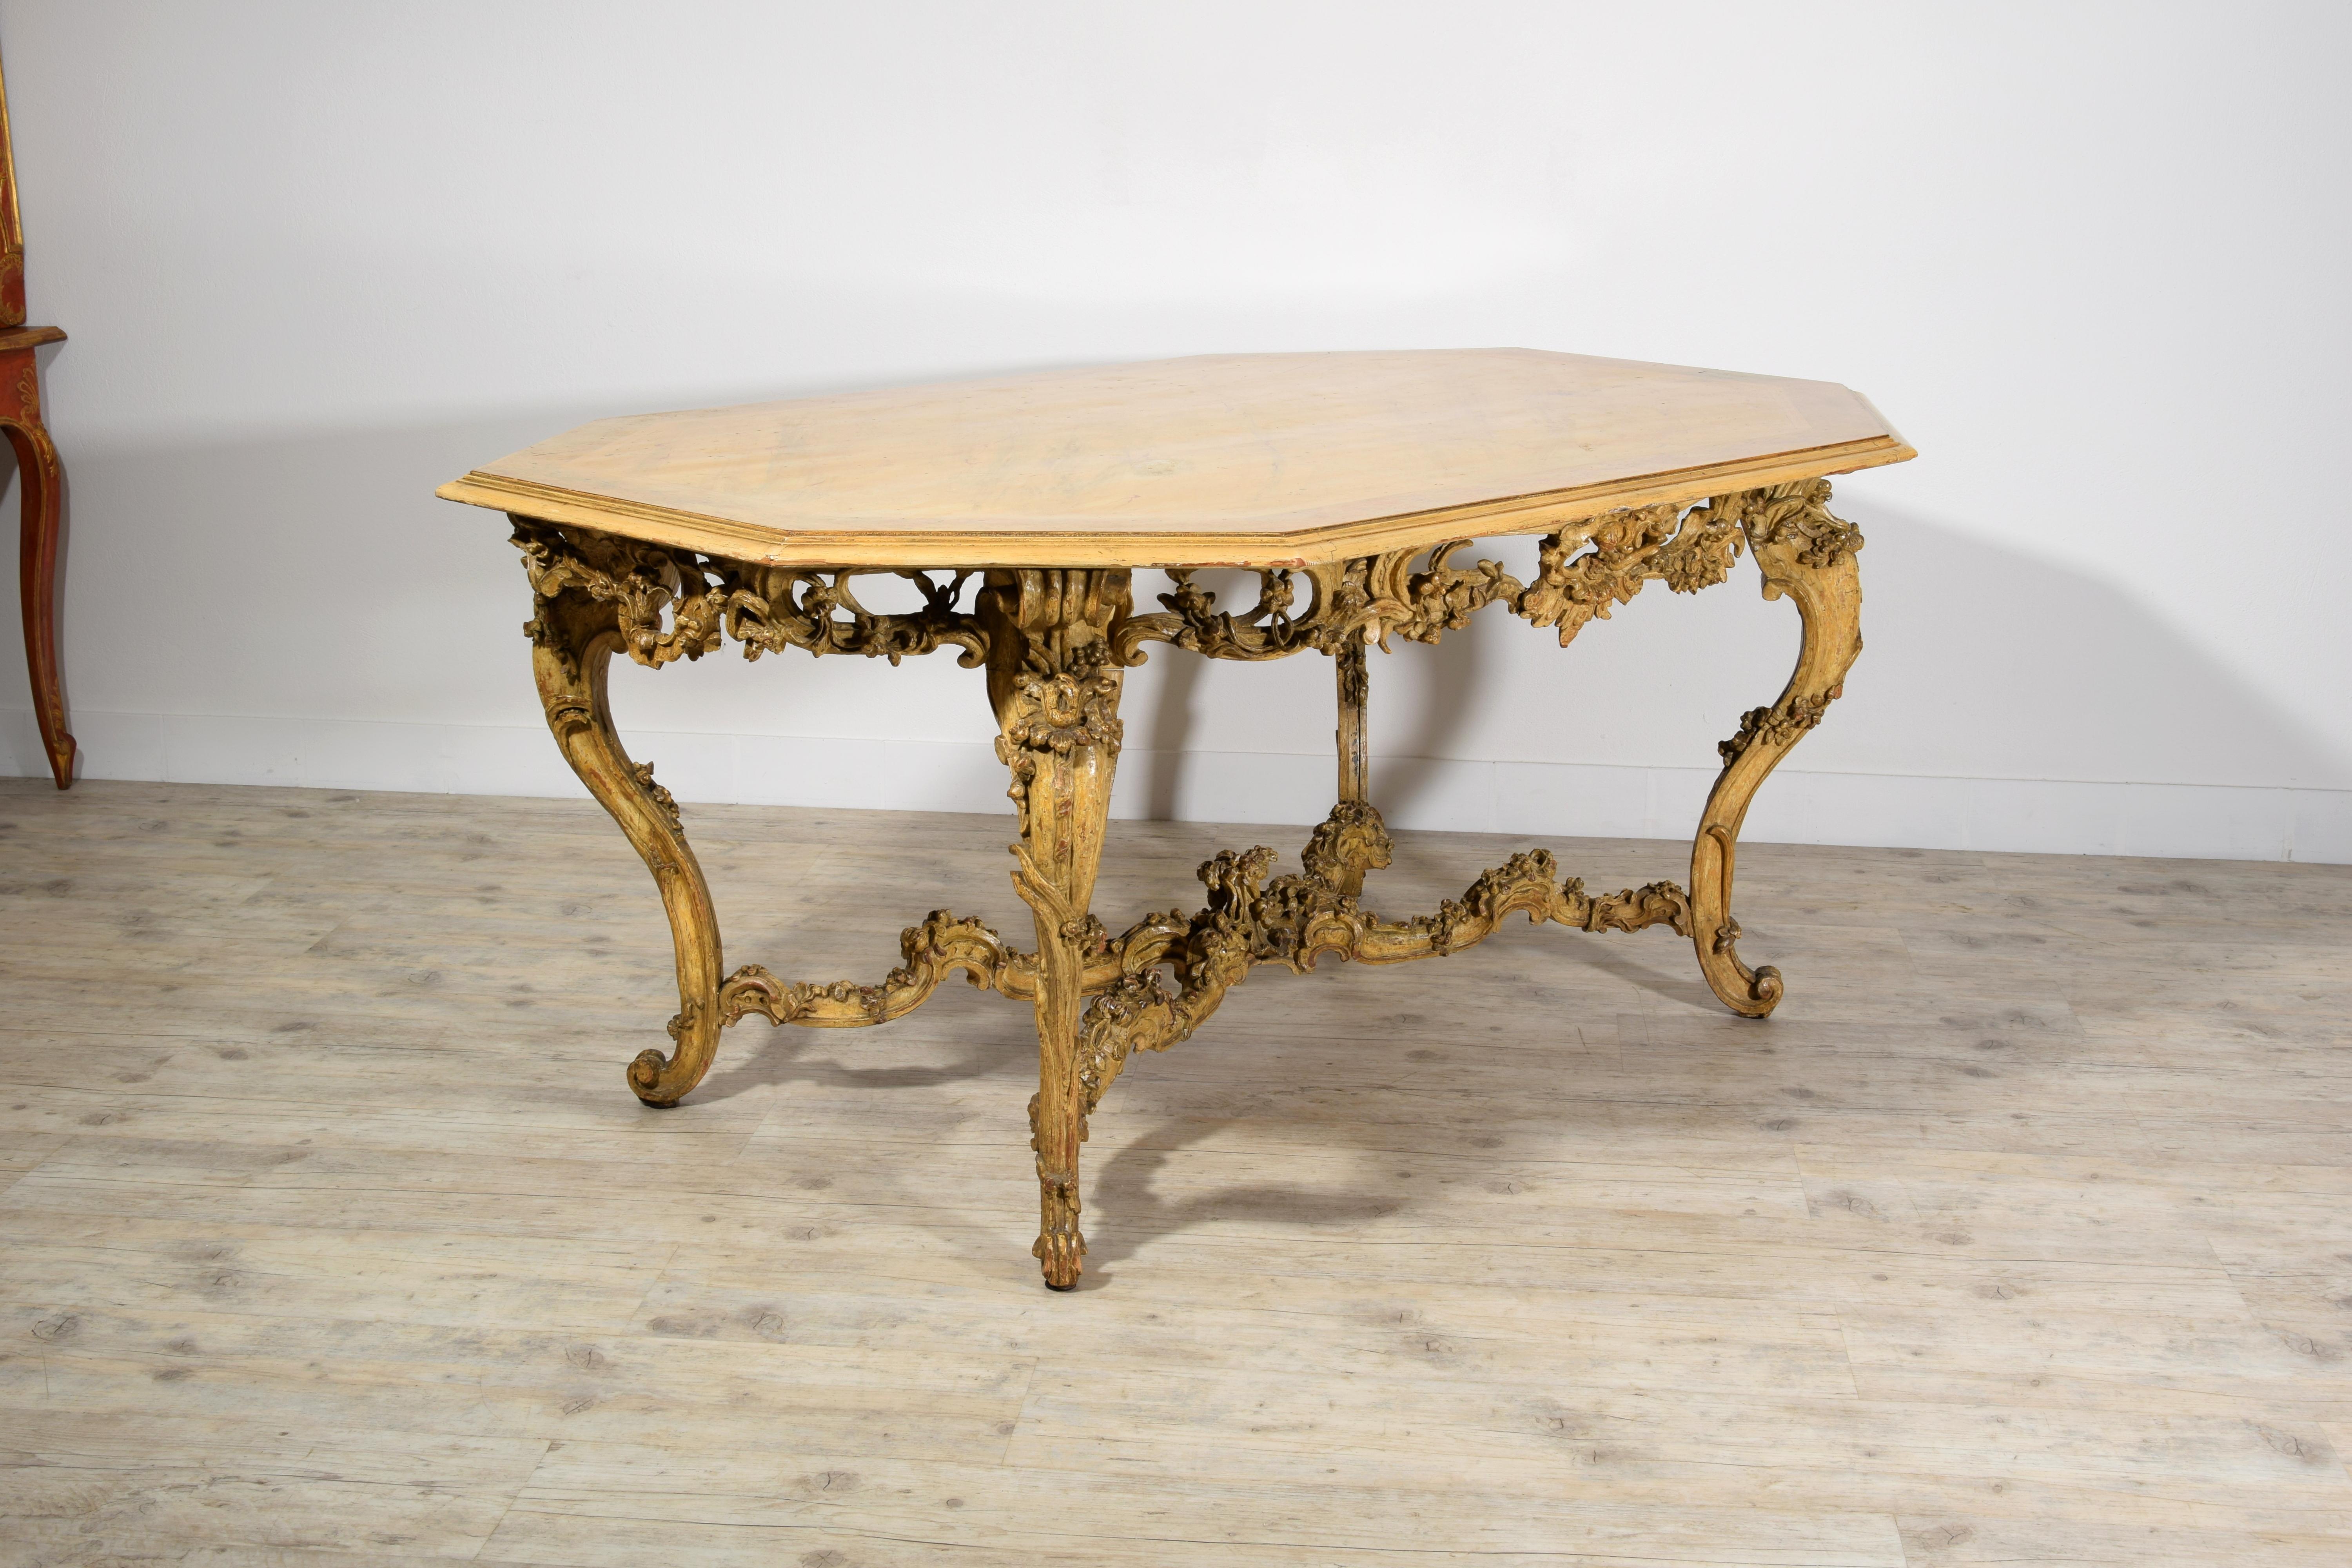 18th Century and Earlier Italian Baroque Carved Gilt and Lacquered Wood Center Table, 18th Century